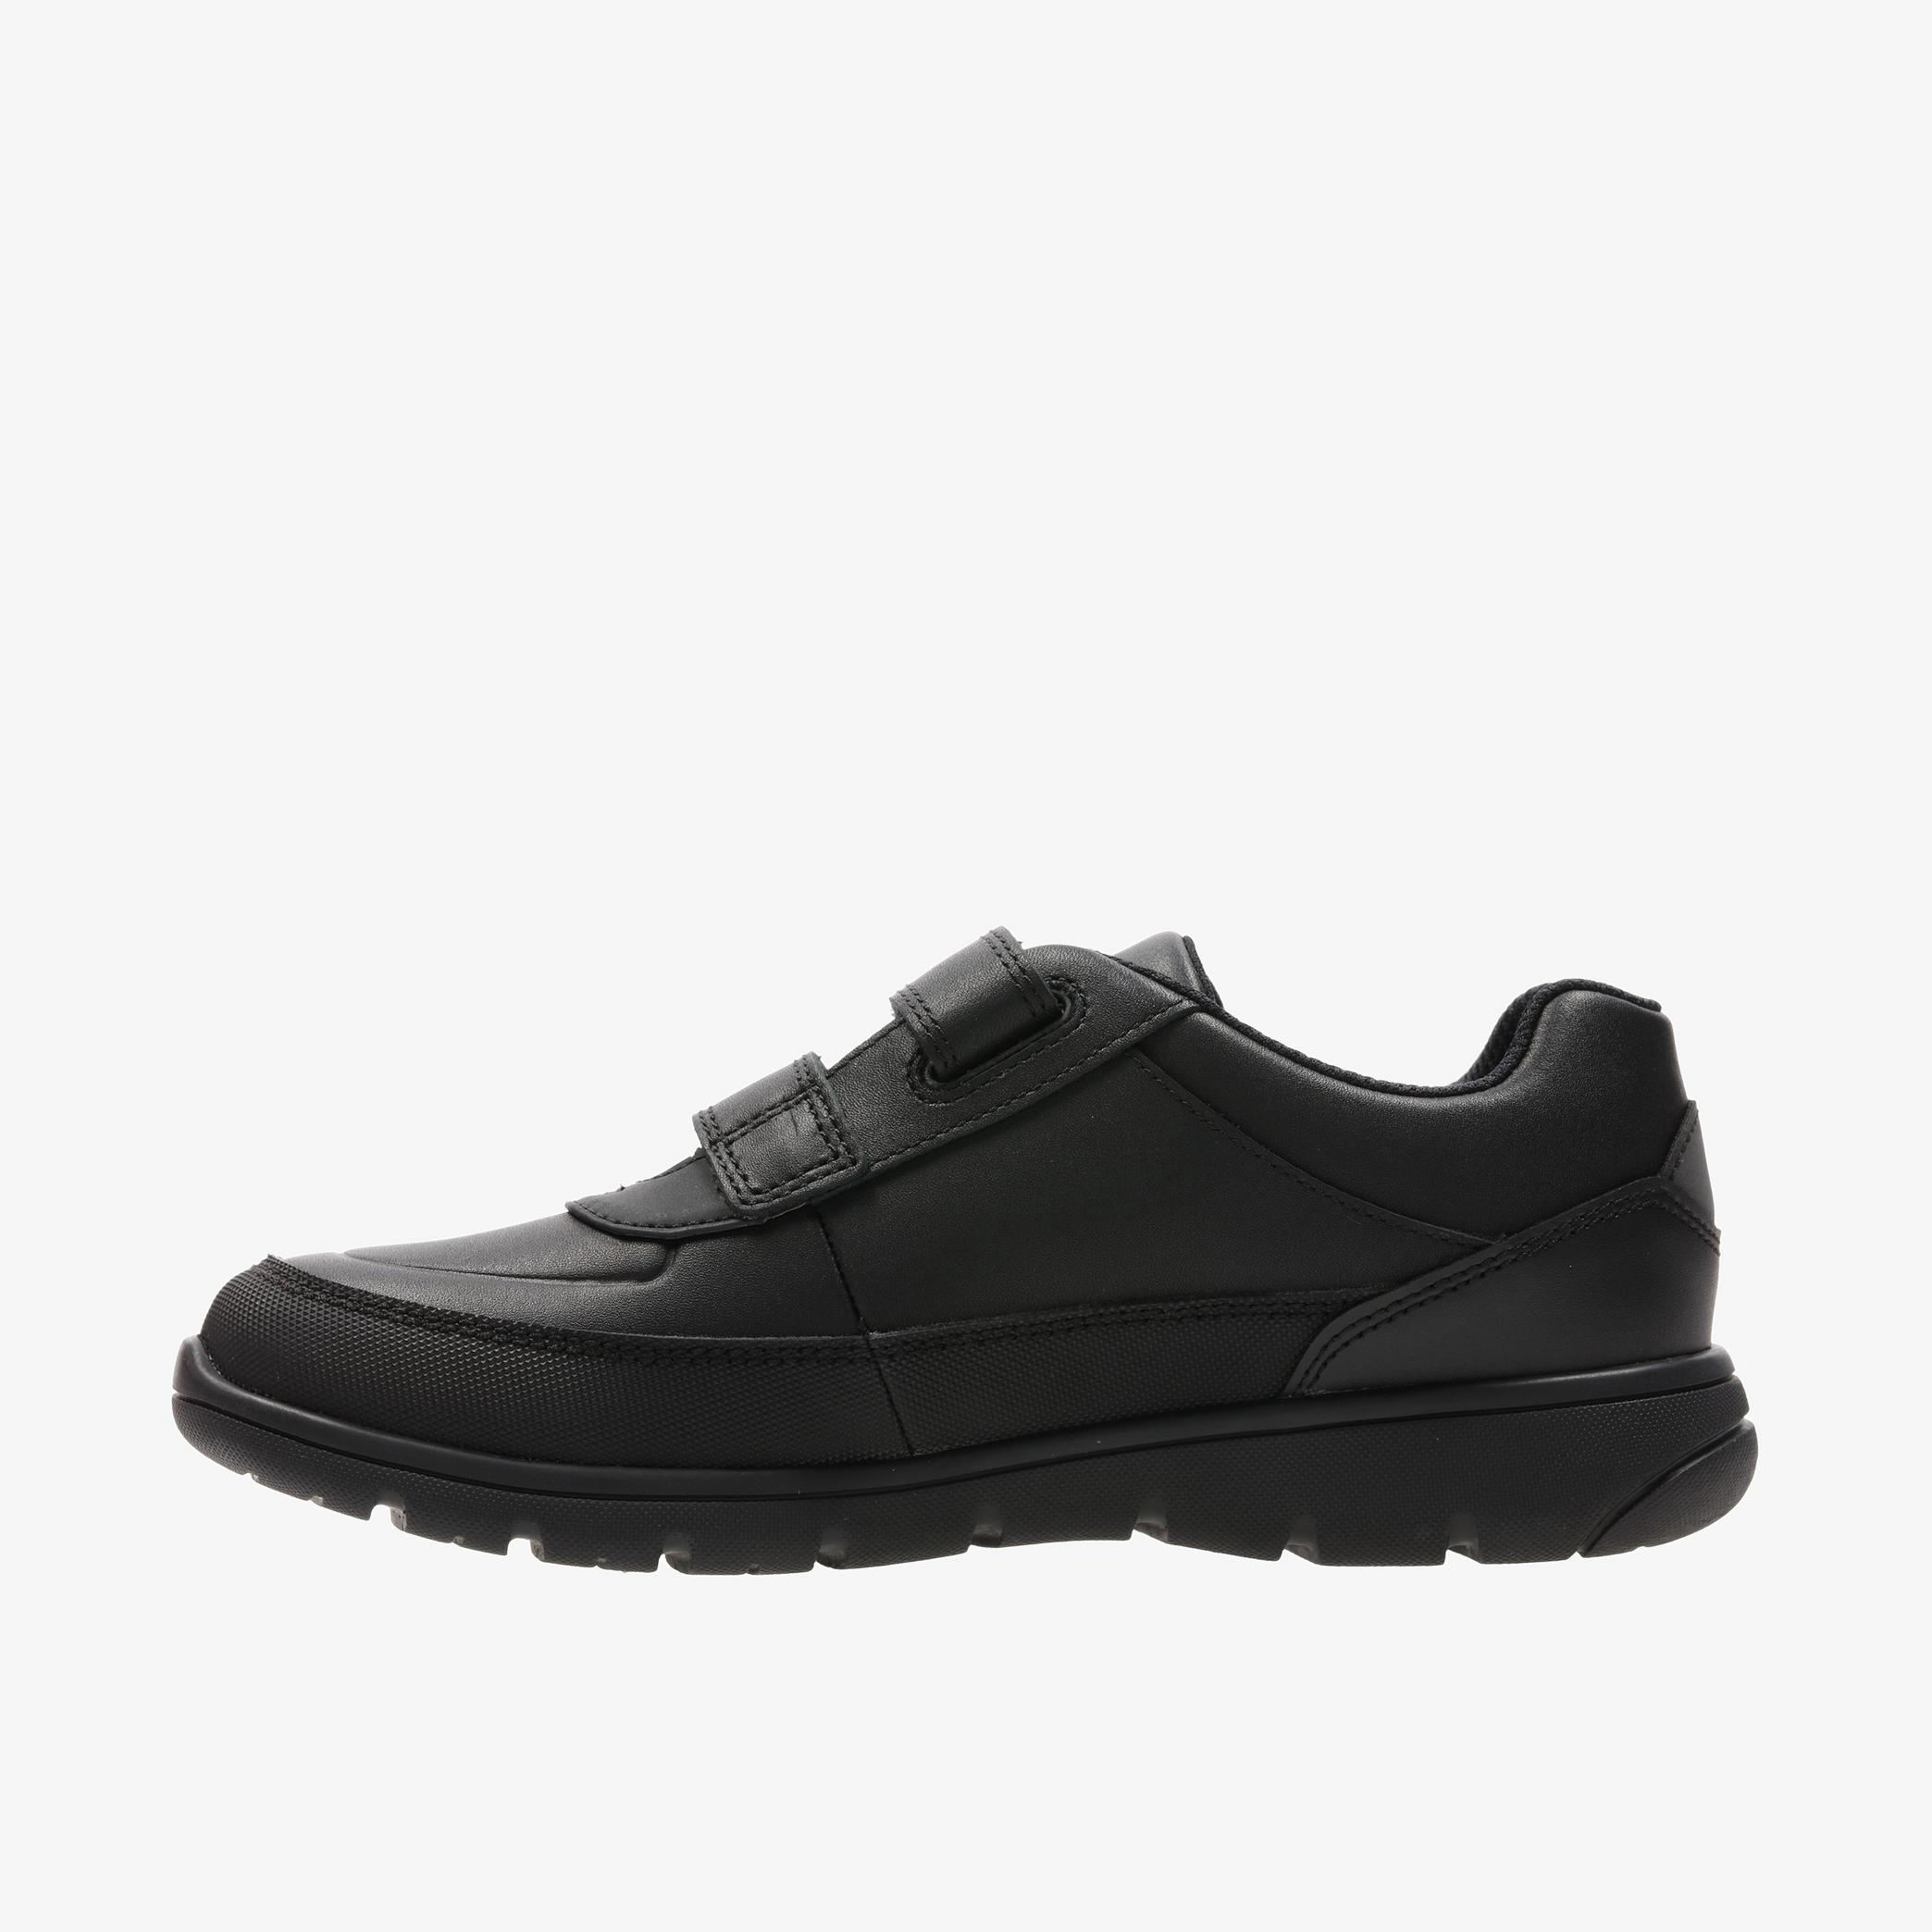 Venture Walk Kid Black Leather Shoes, view 2 of 6